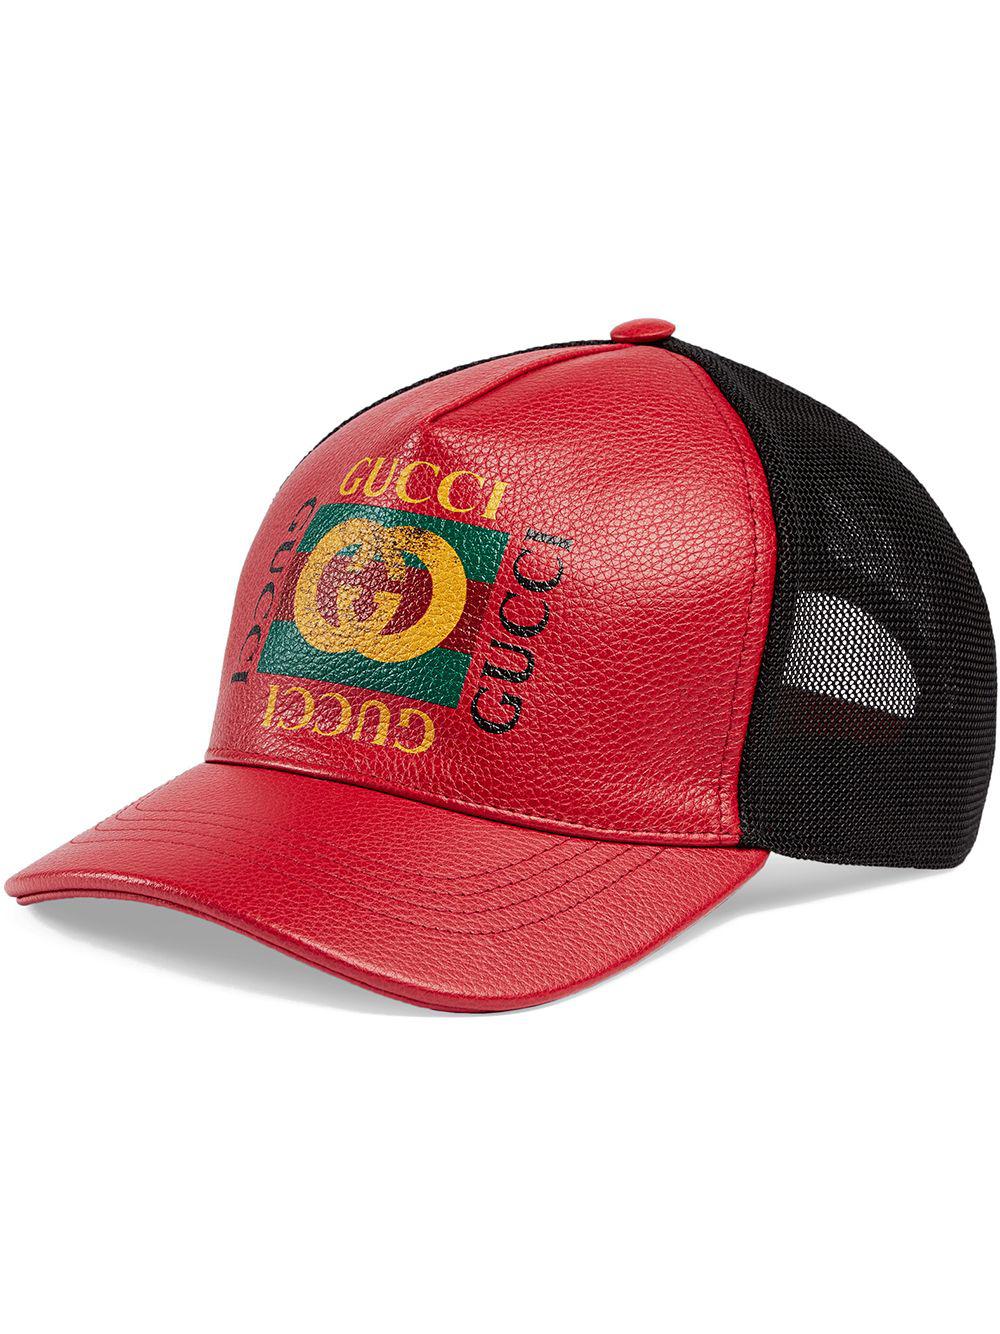 Gucci Print Leather Baseball Hat in Black Poppy Red (Red) for Men | Lyst